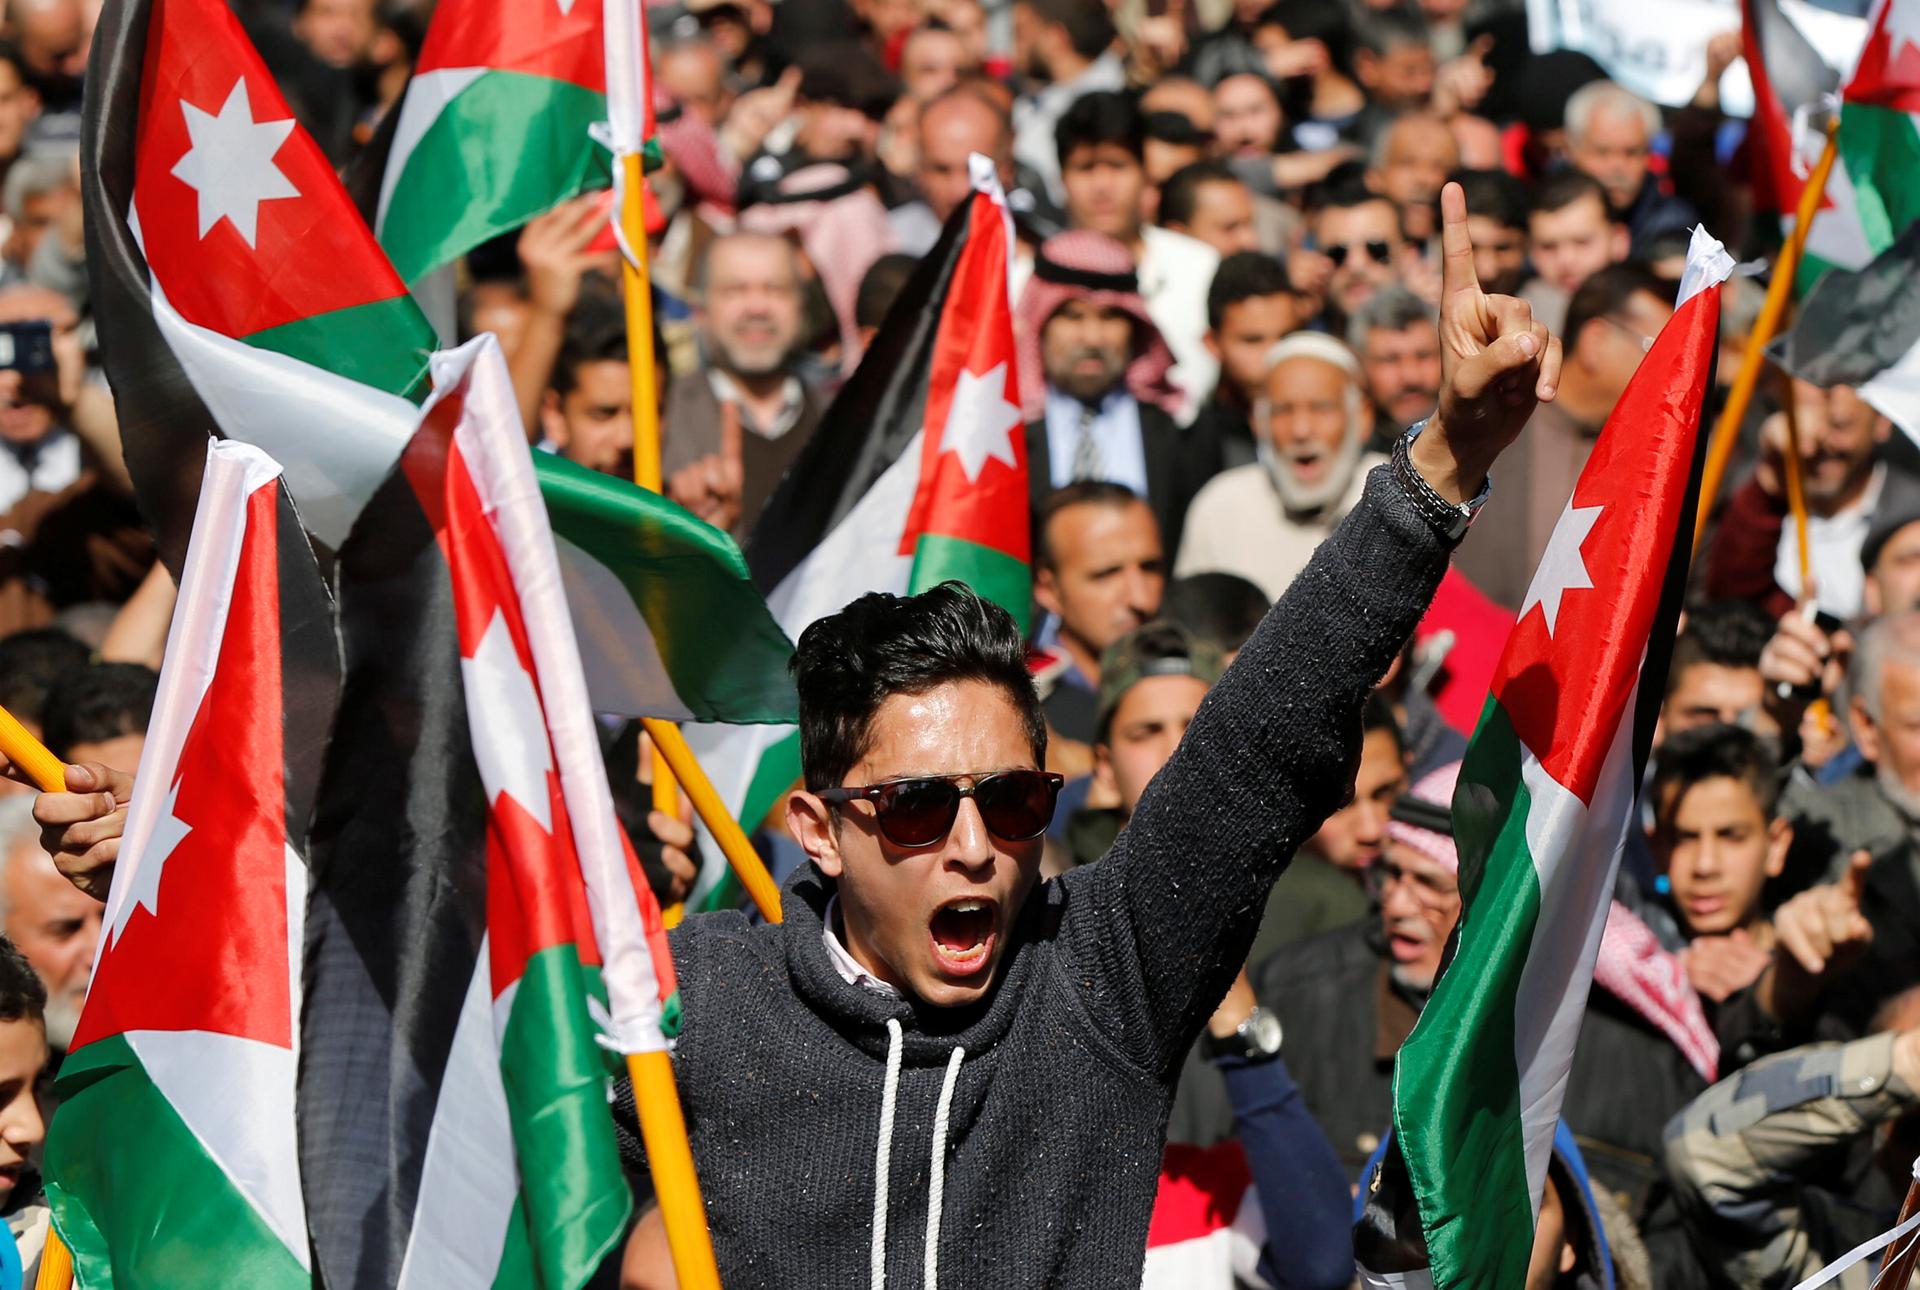 Demonstrators hold Jordanian national flags and chant slogans during a protest against rising prices and the imposition of more taxes, after the Friday prayer in Amman, Jordan, Feb. 24, 2017.